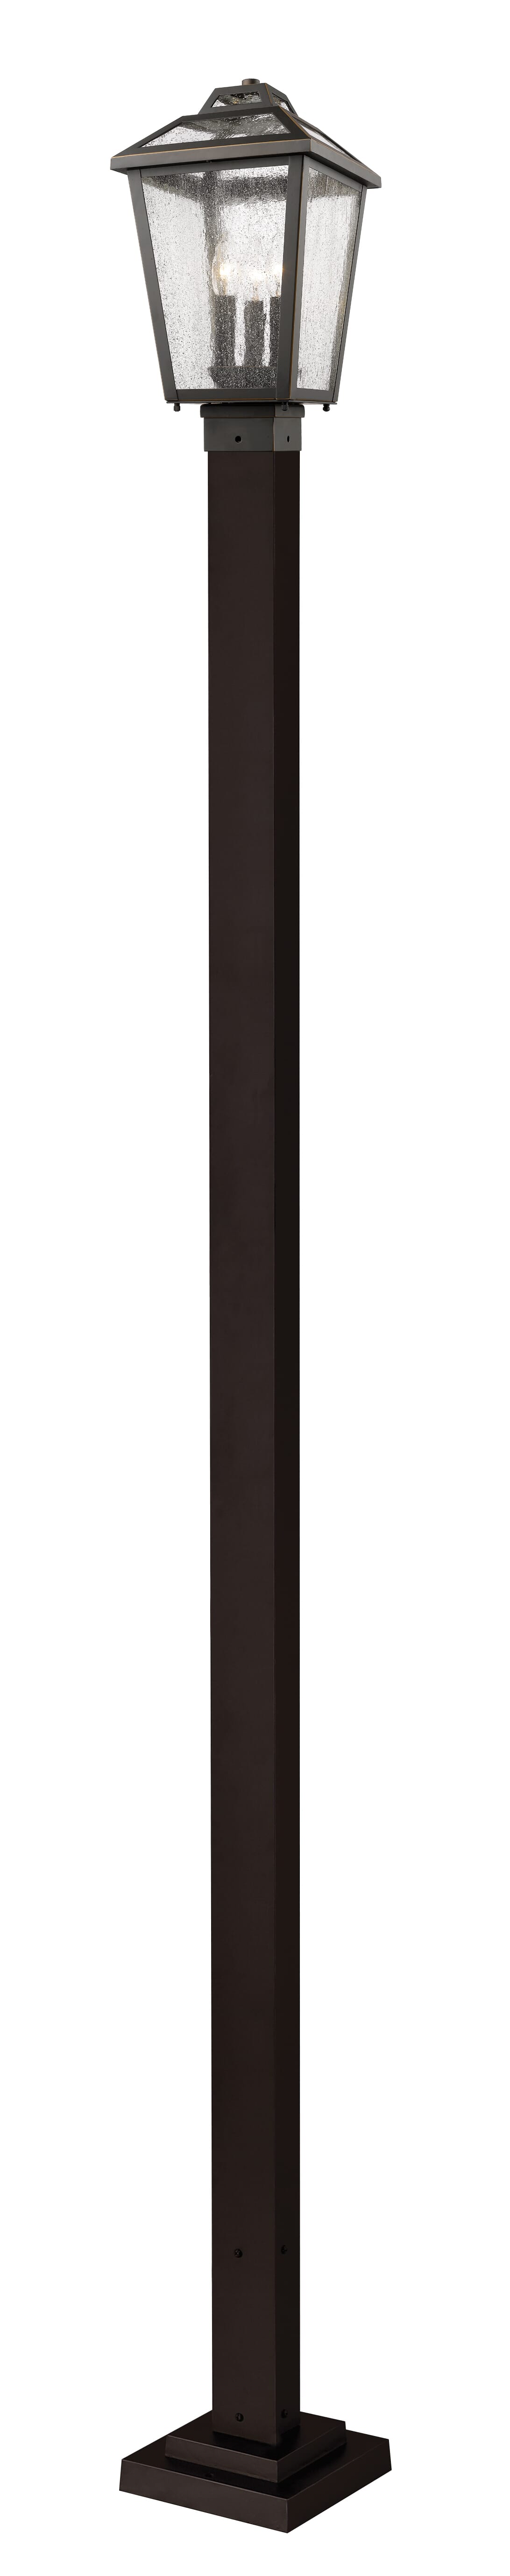 Bayland 3-Light Outdoor Post Mounted Fixture Light In Oil Rubbed Bronze